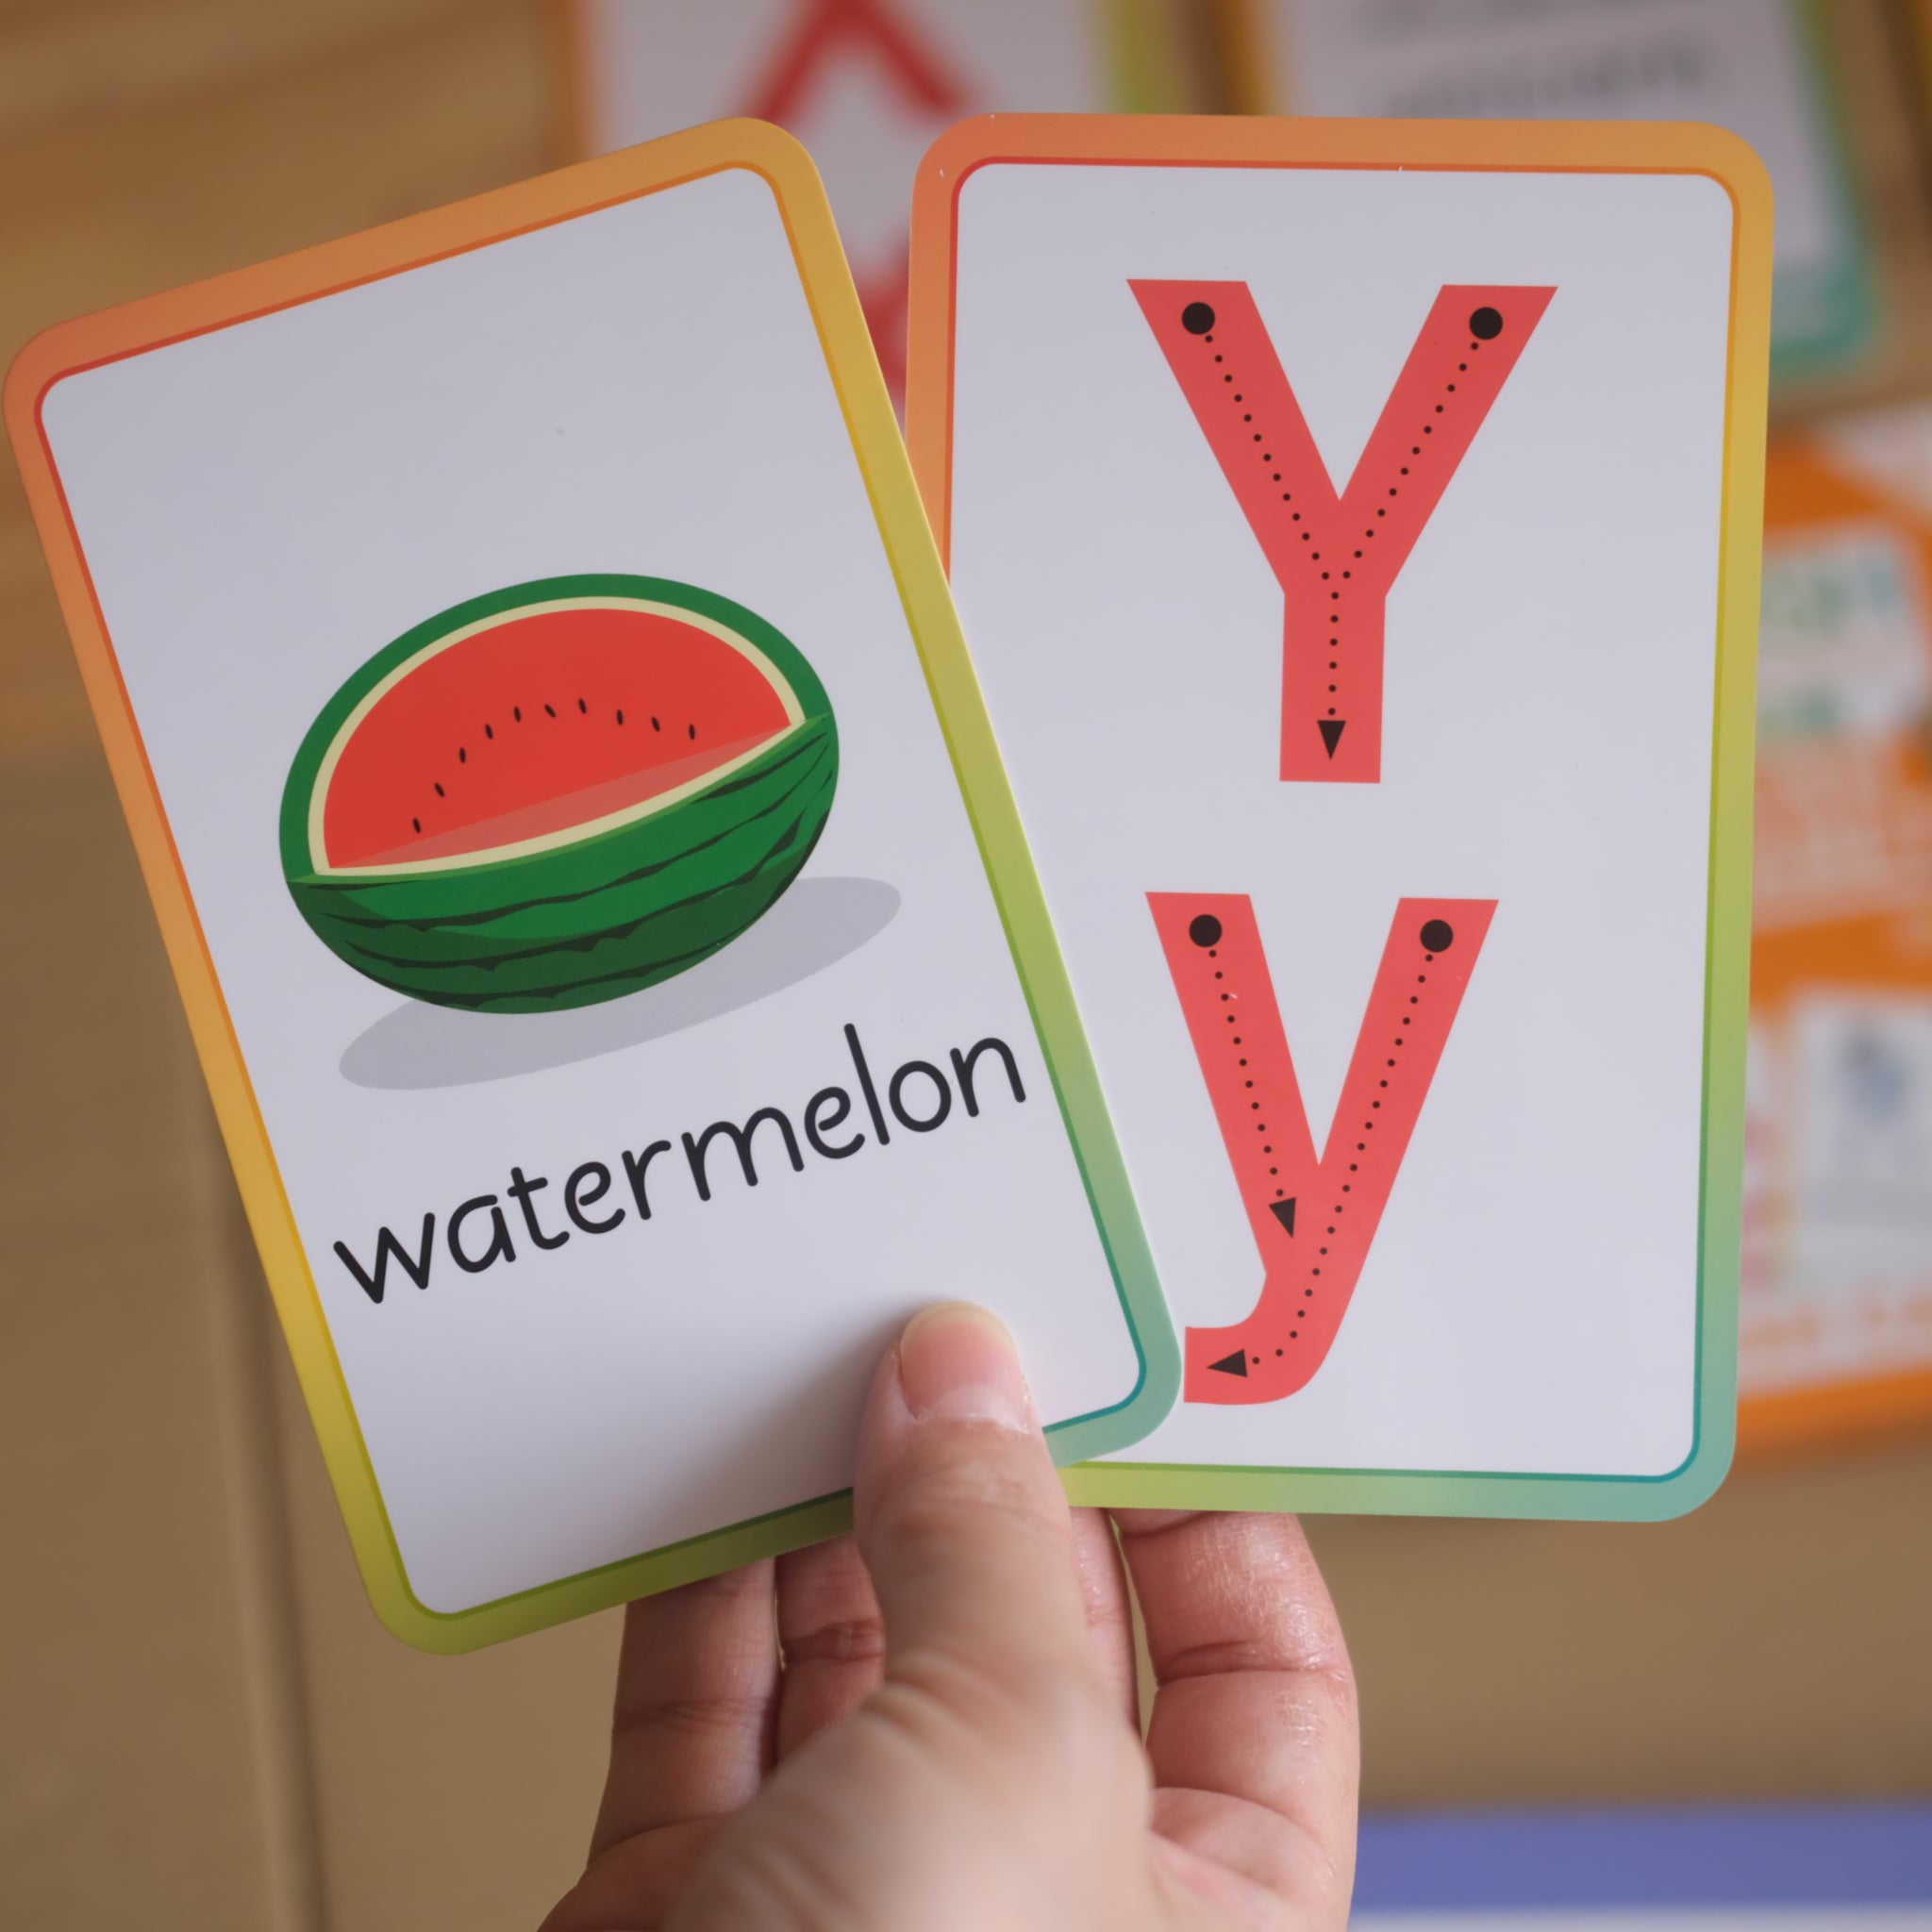 English for Everyone Junior Flash Cards